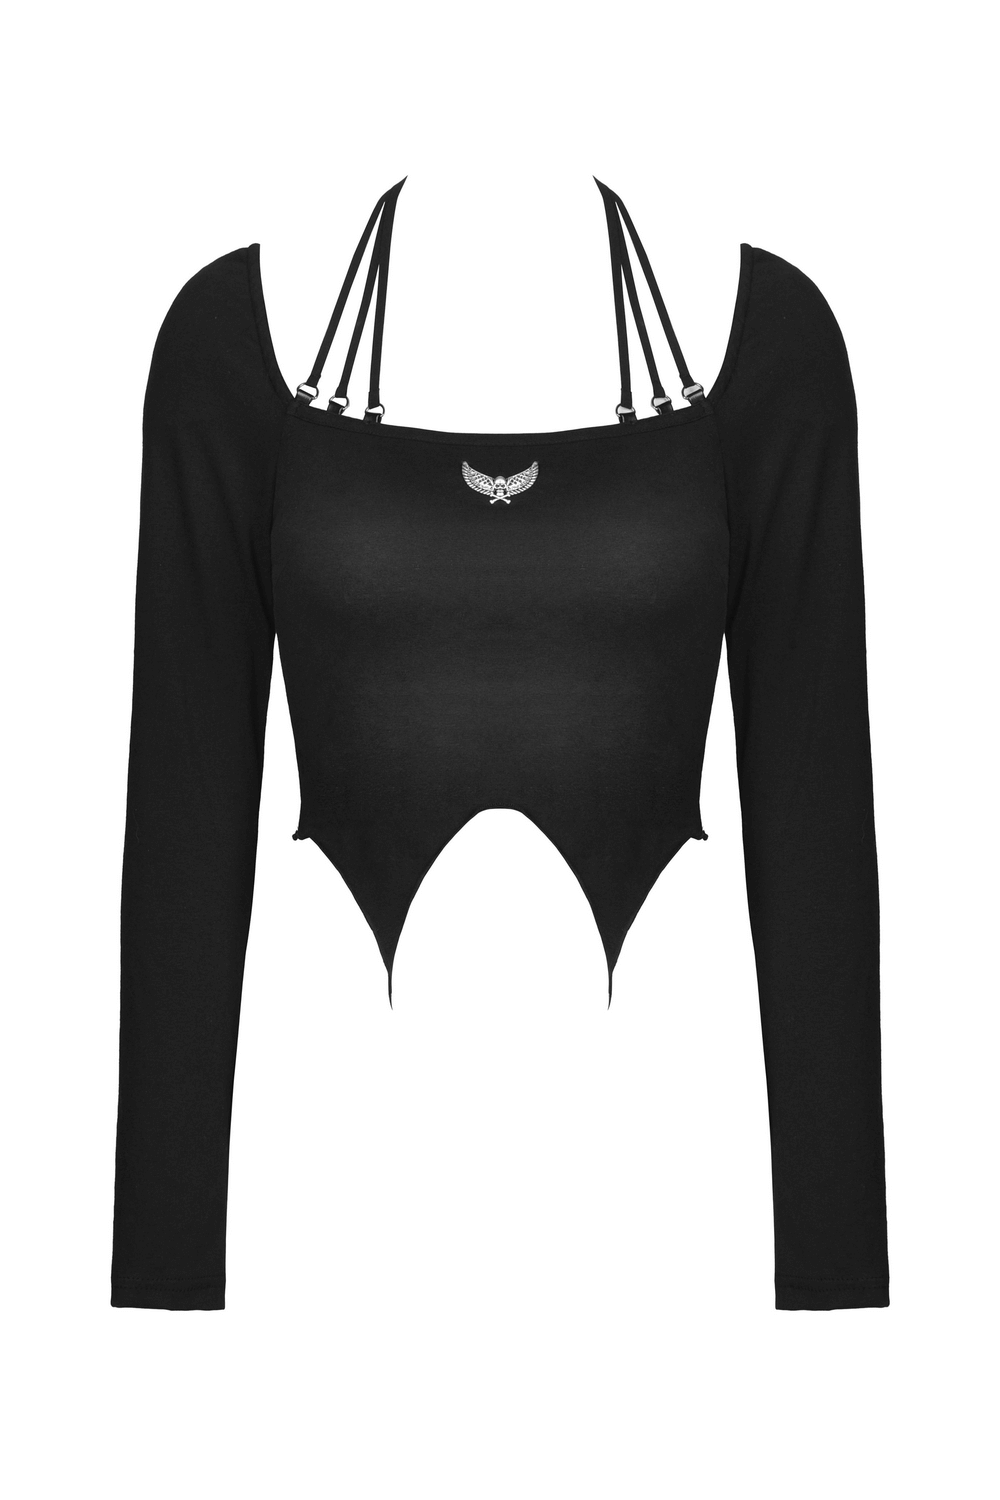 Dark Gothic Multi-Rope Halter Top with Skull and Wings